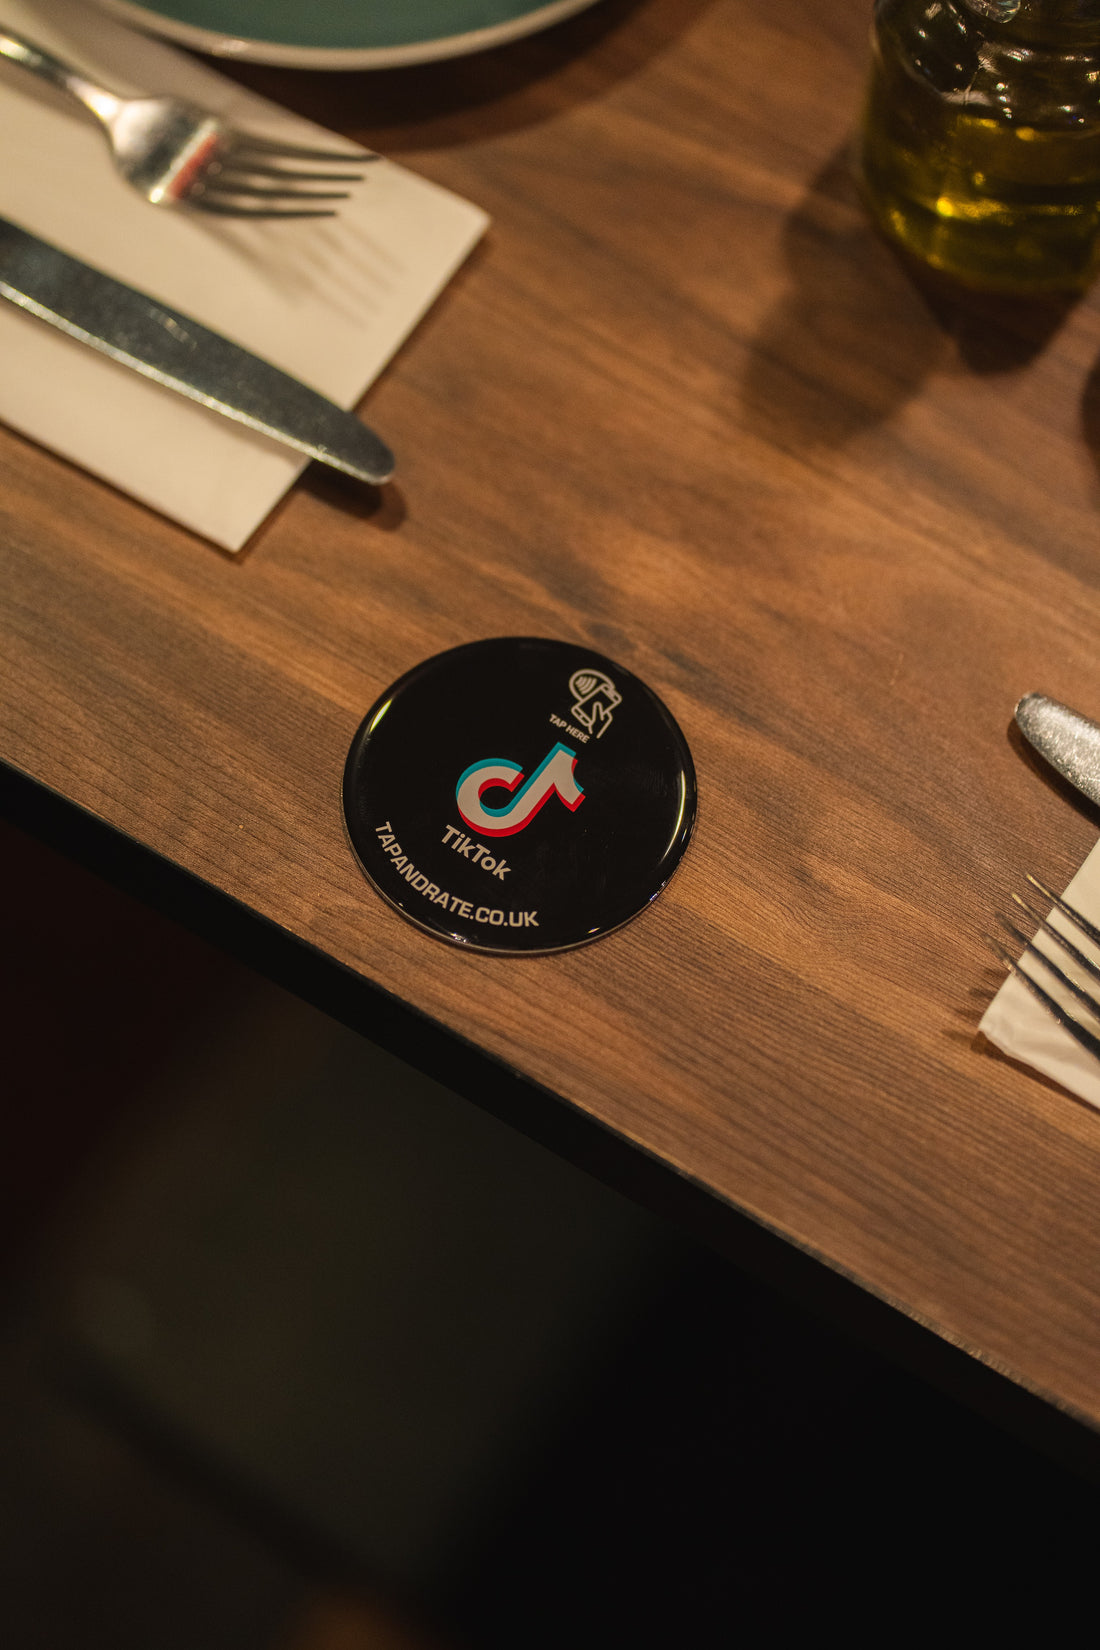 NFC Enabled Tiktok Smart Coin. Best chip, premium quality. Customers can follow you on Tiktok in one simple tap. No searching or finding your business, comes setup to your business so all the customer has to do is tap their phone and leave a rating. Ready to use out of the box! Get more followers, more orders and more engagement. Get more Customer with this simple to use product. Place on the counter or on individual tables. Tap and Rate.